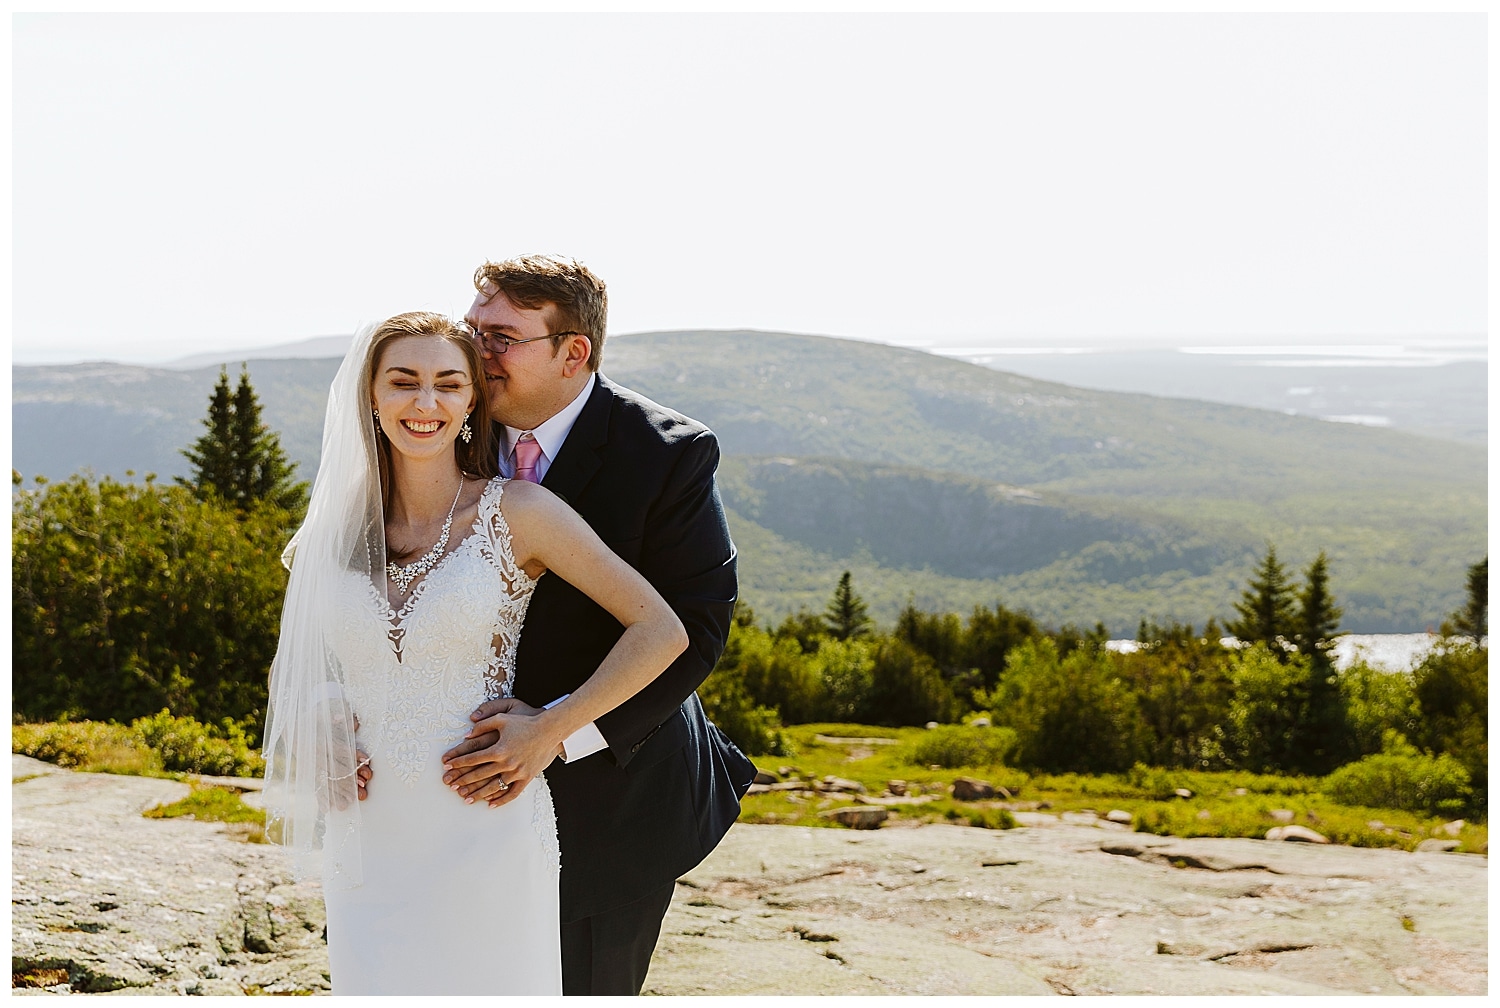 Bride and groom laughing together in Acadia National Park